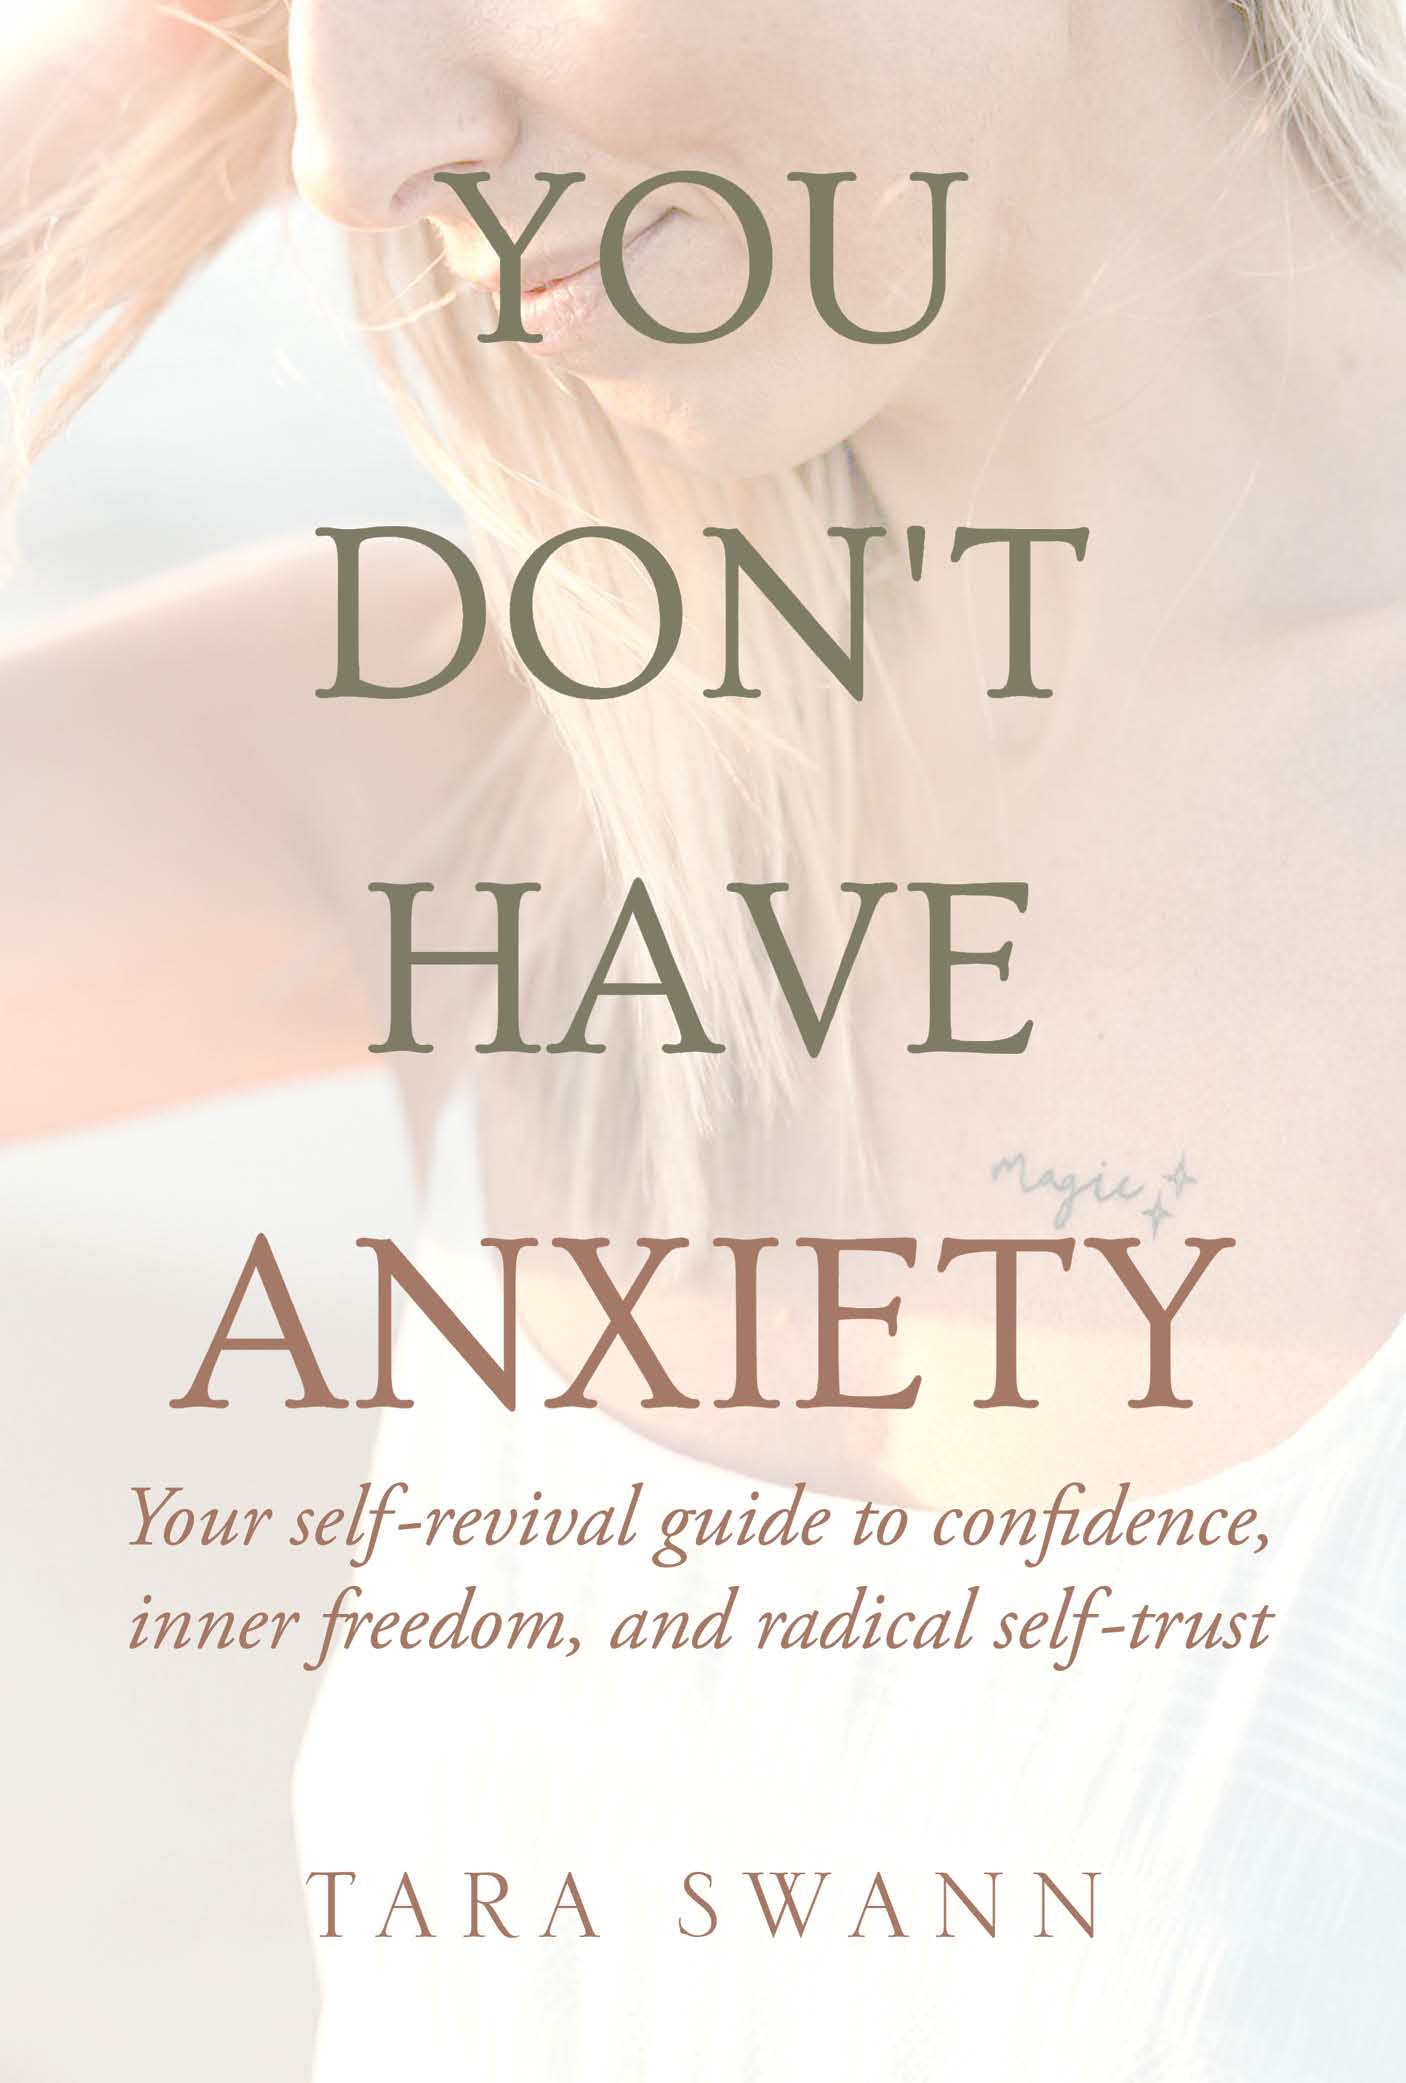 YOU DON’T HAVE ANXIETY